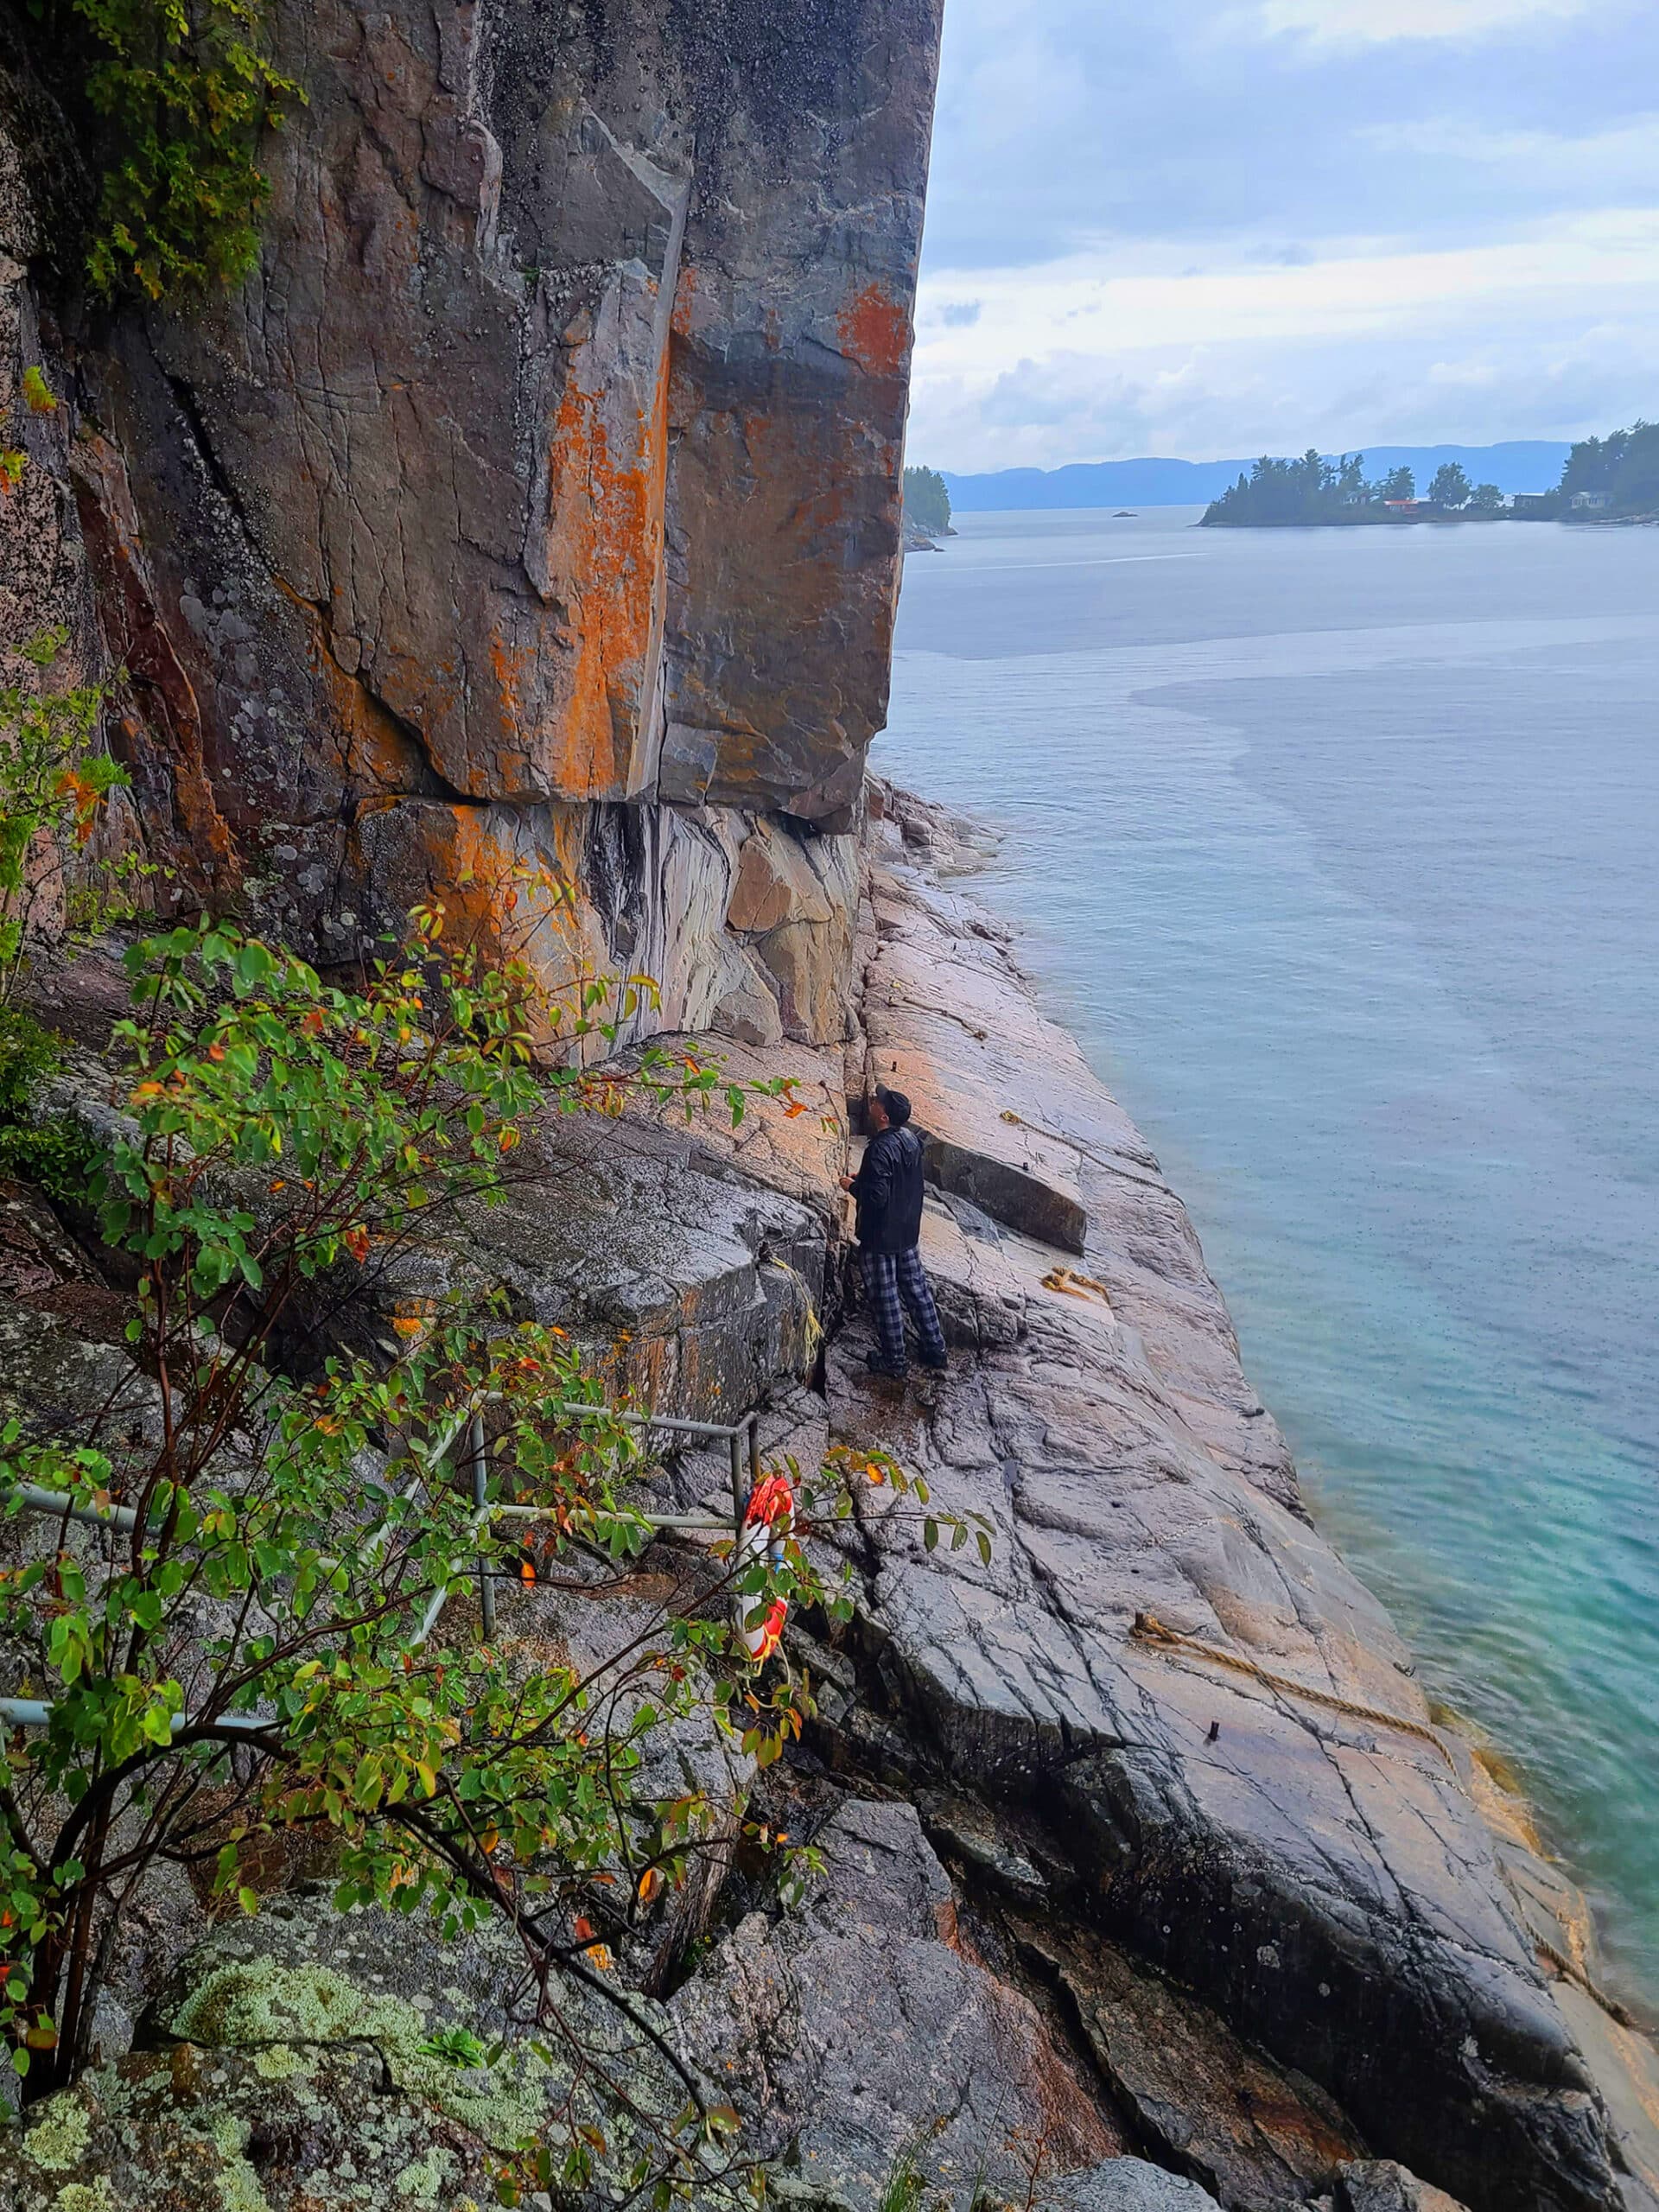 A long view photo looking down at a man standing on rocks, lake superior behind him.  He is looking at the Agawa Bay Rock Pictographs,